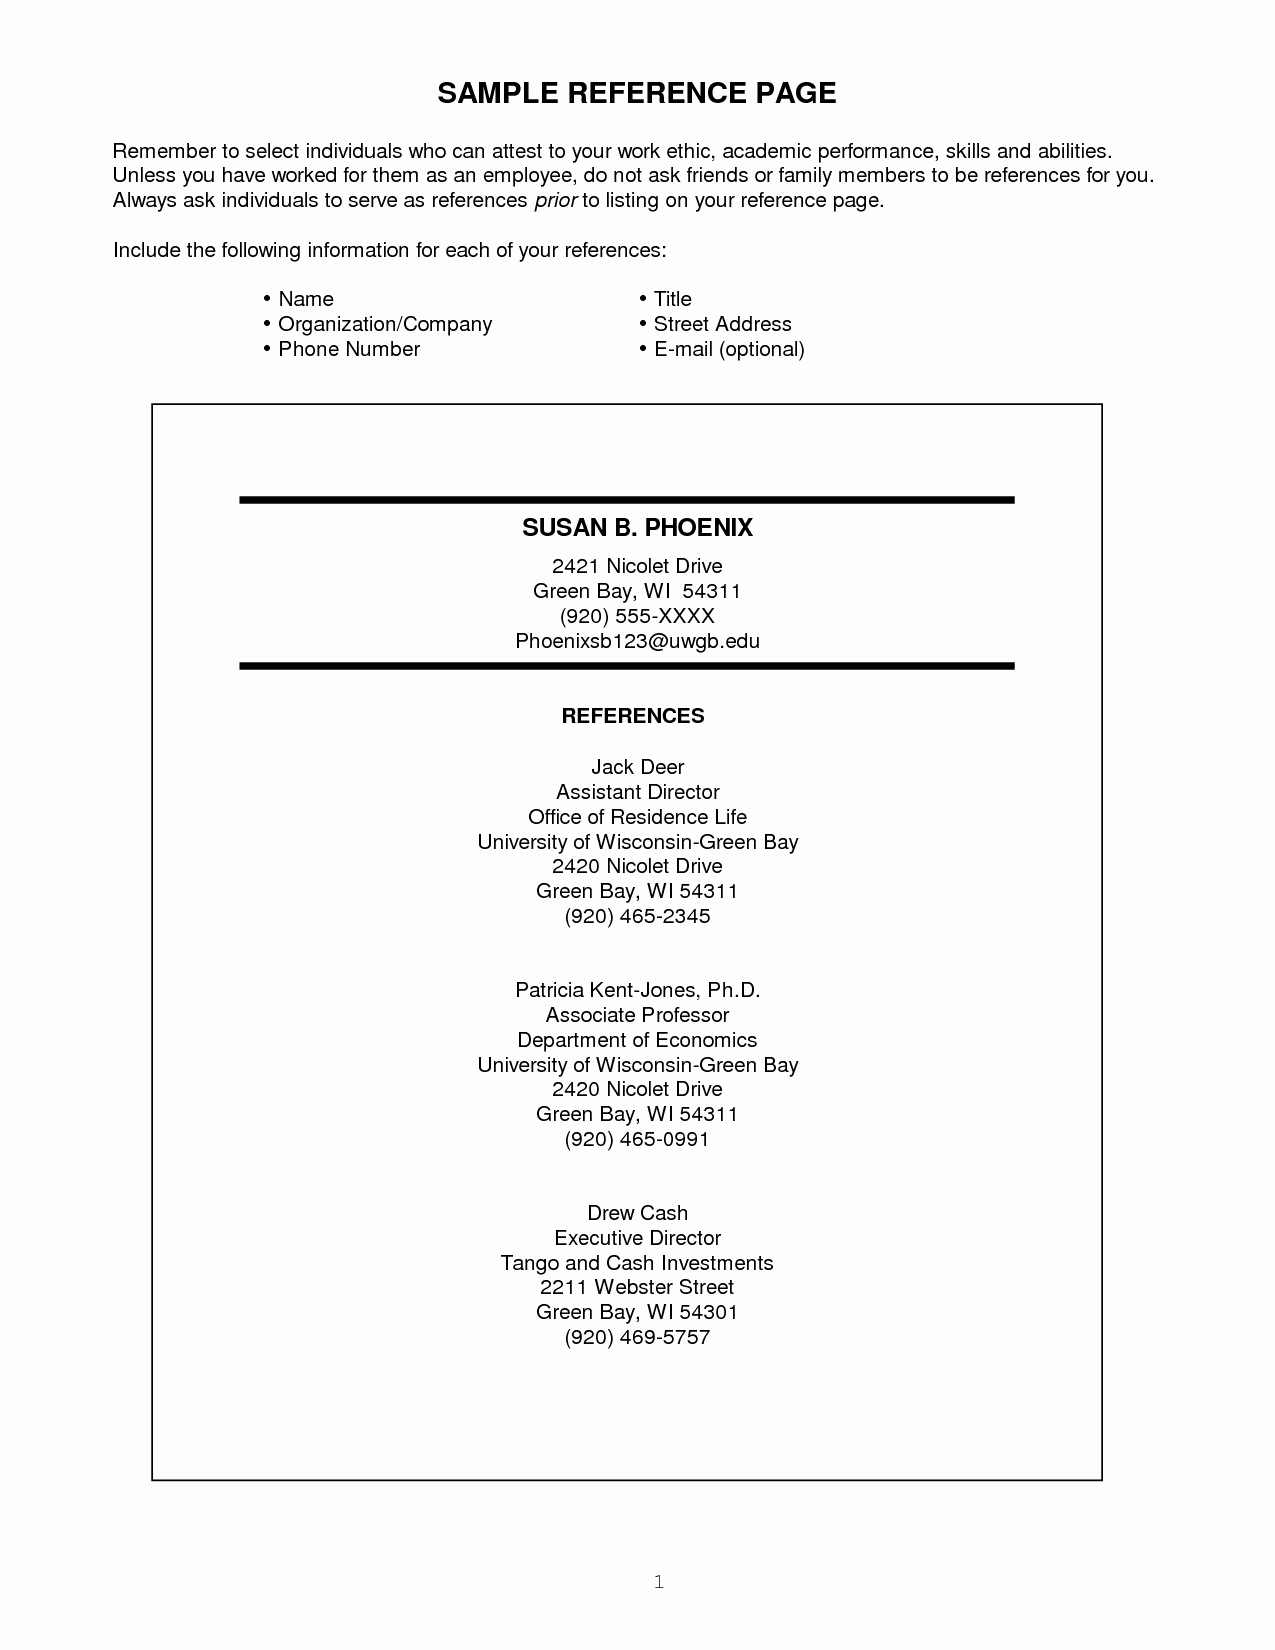 Example Of Professional References Page Awesome Reference Sample for Resume